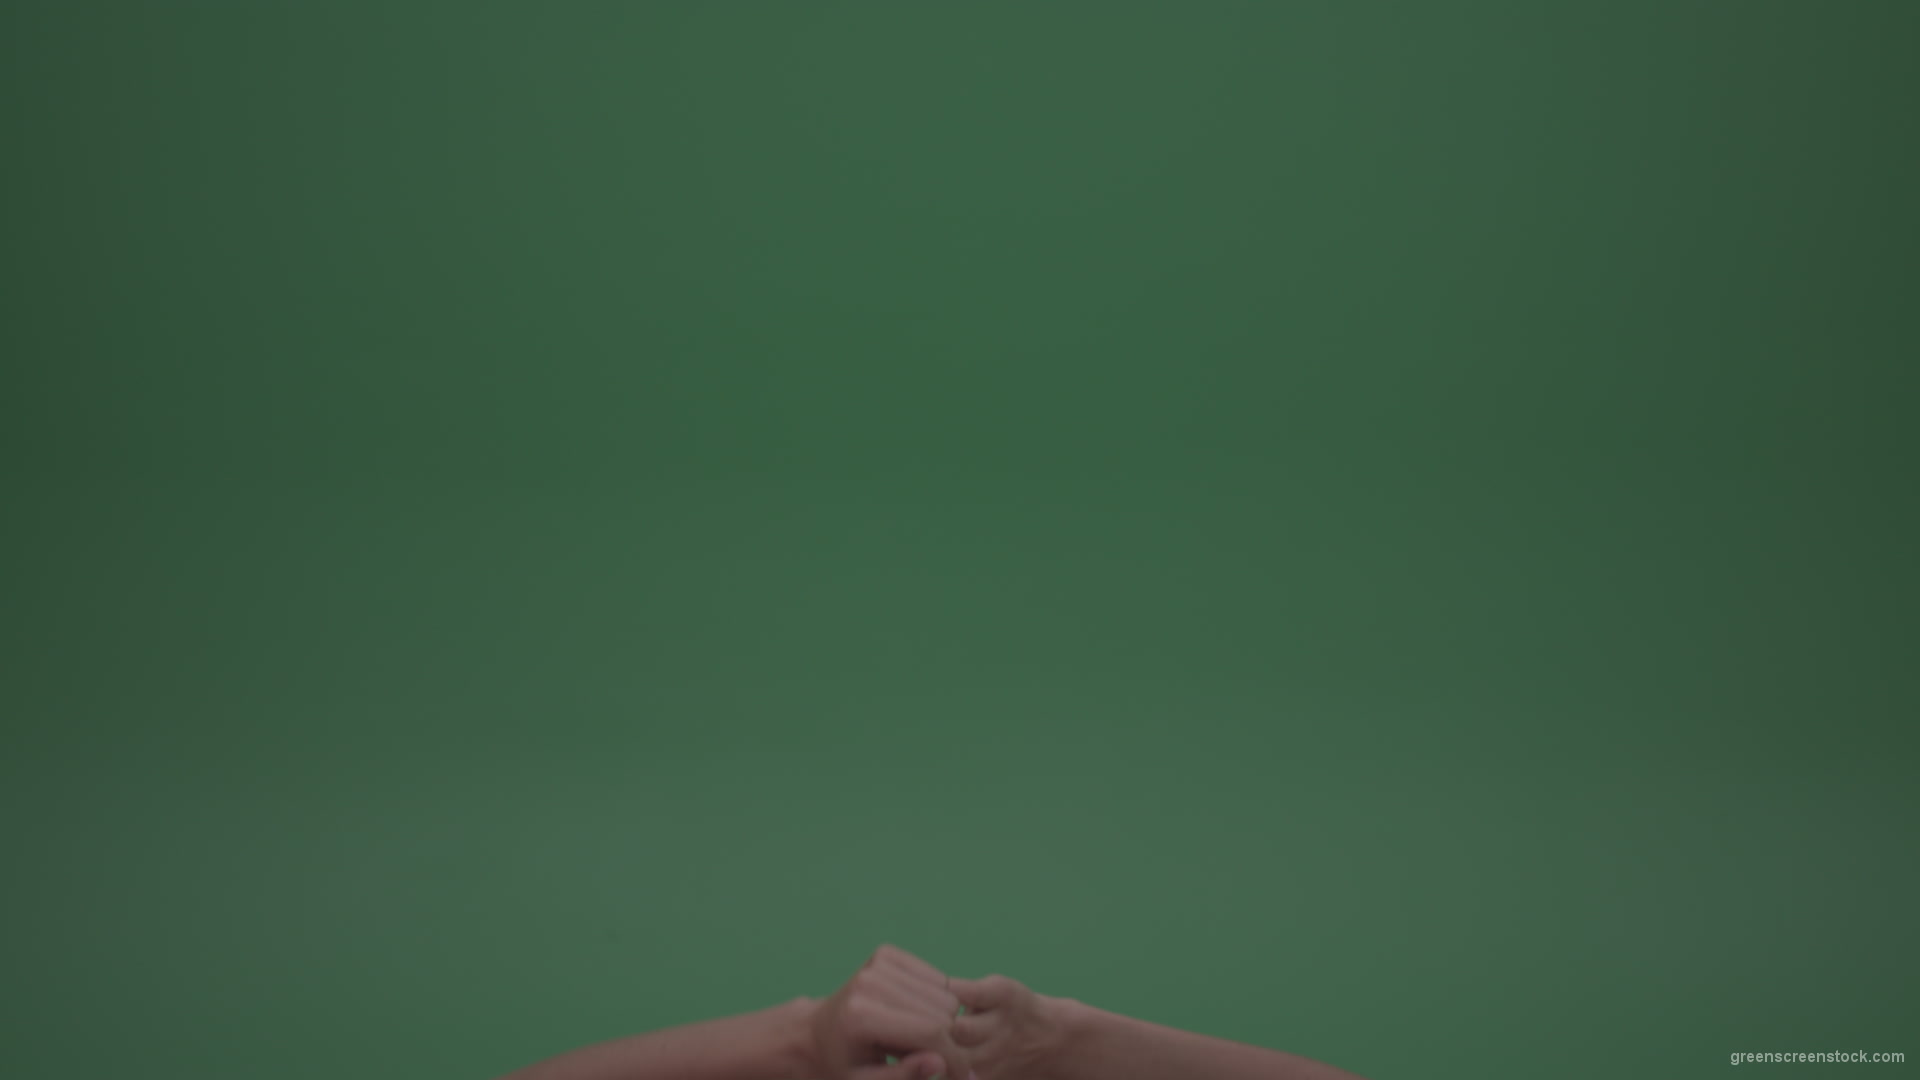 Rapidly-Clapping-Young-FemaleHands-Ovation-GreenScreenWall-ChromaKey-Background_009 Green Screen Stock